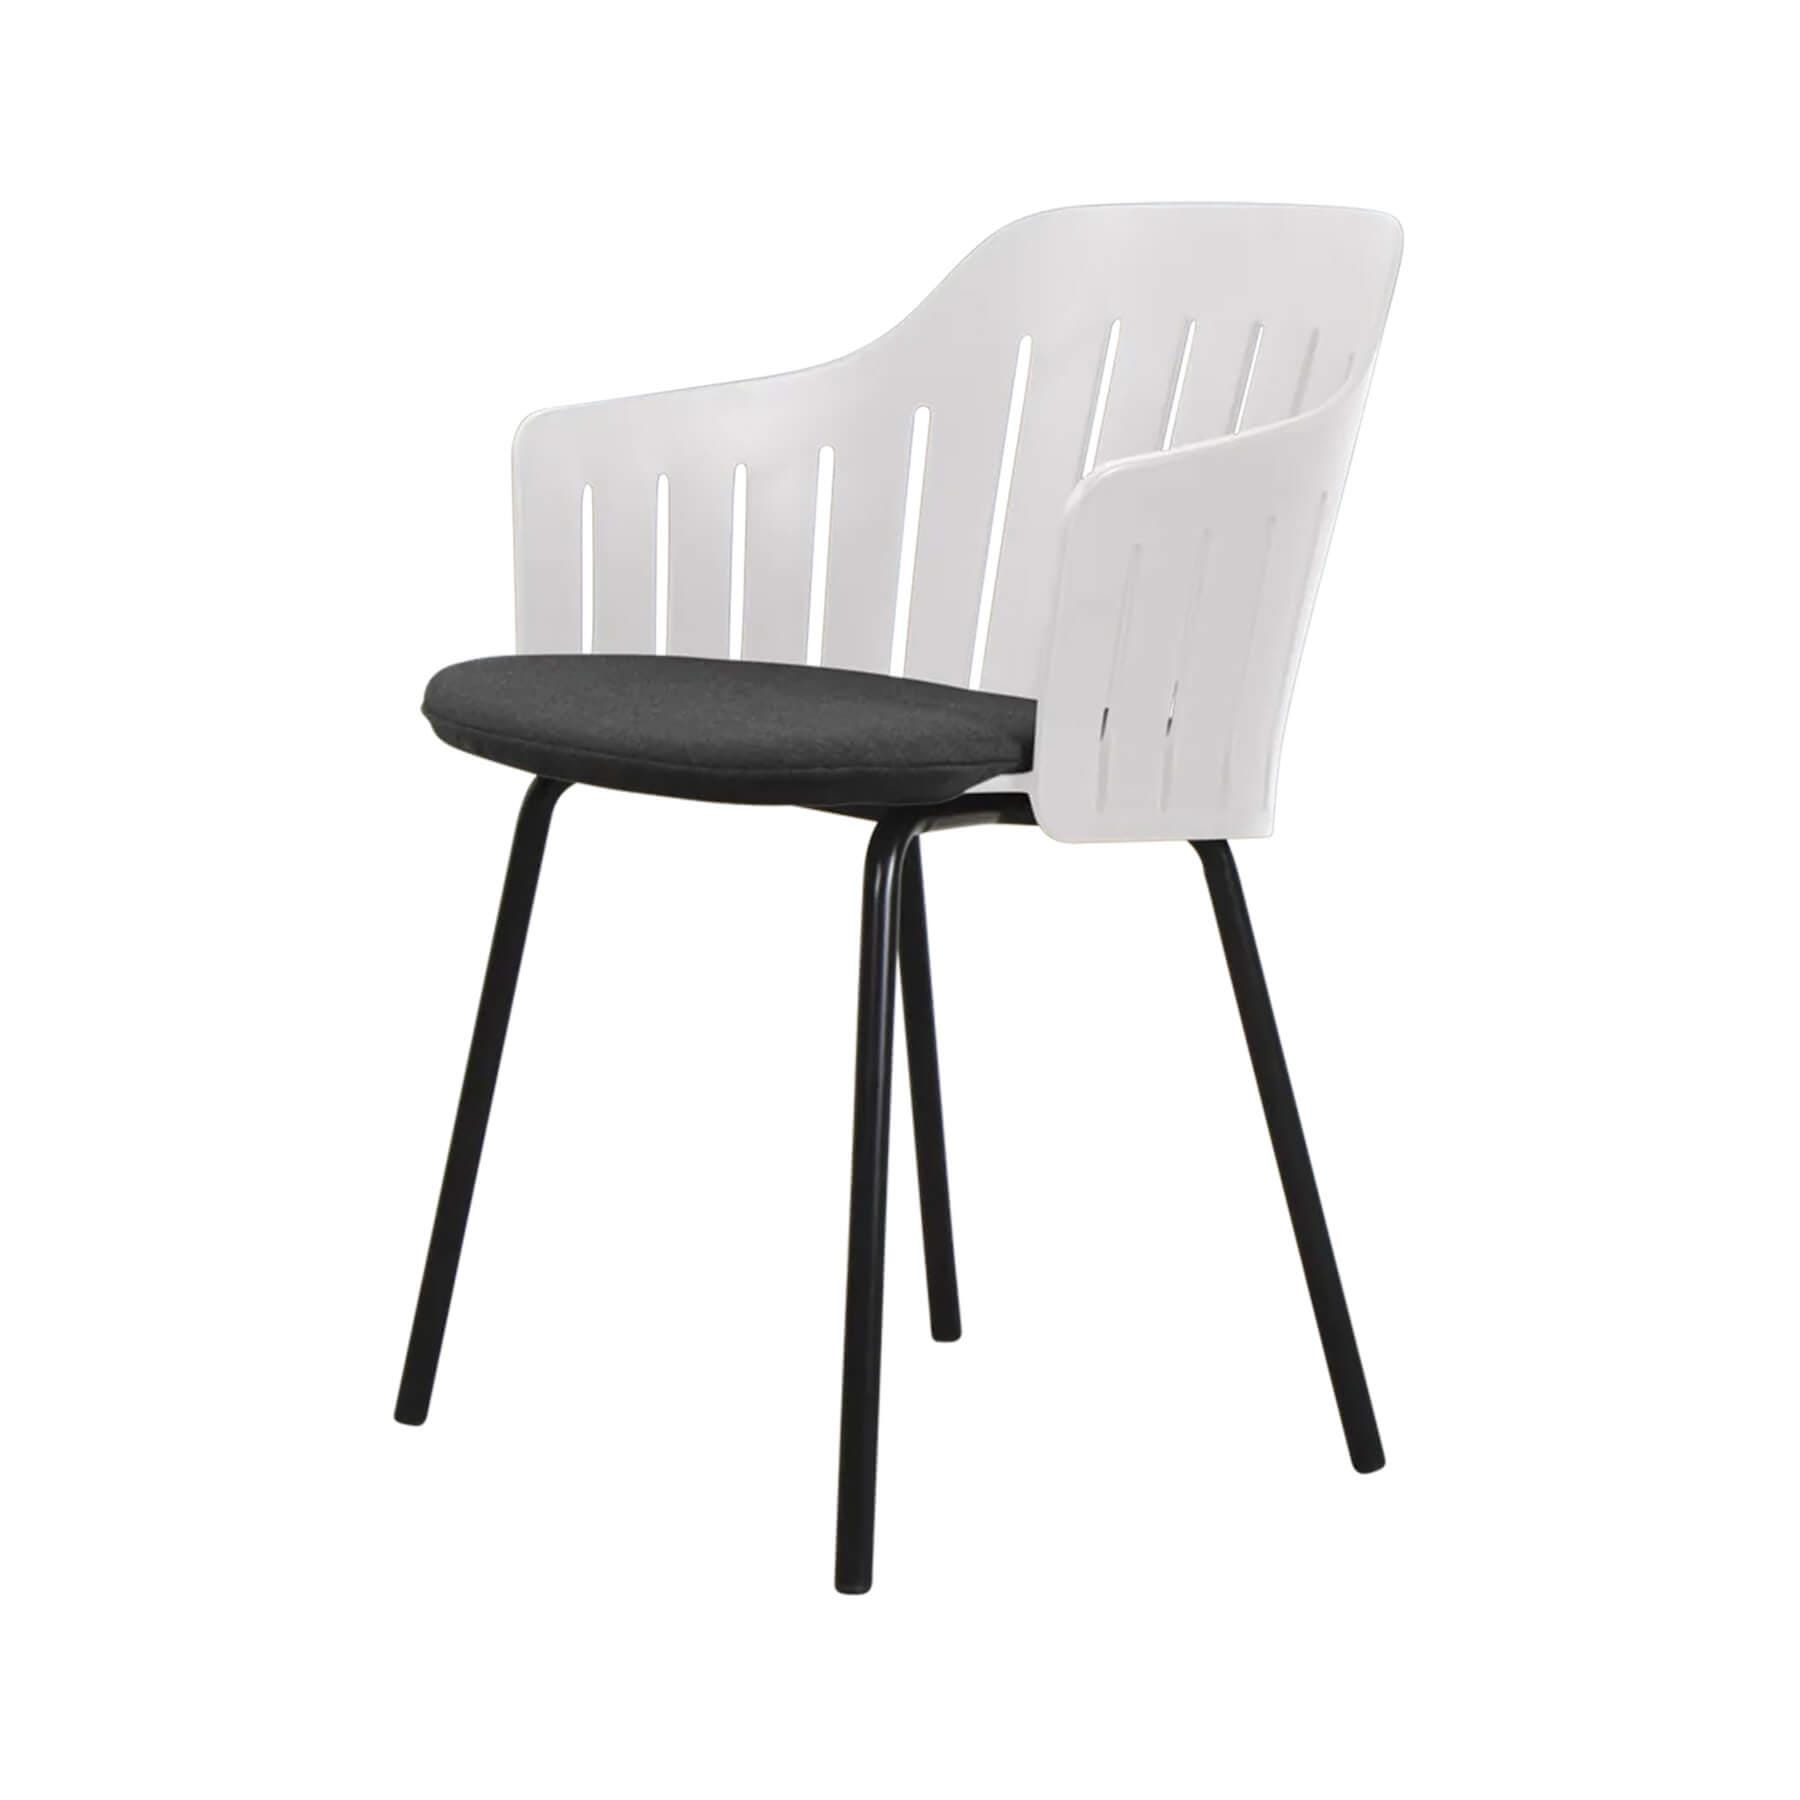 Caneline Choice Outdoor Chair With Steel Legs White Seat Black Cushion